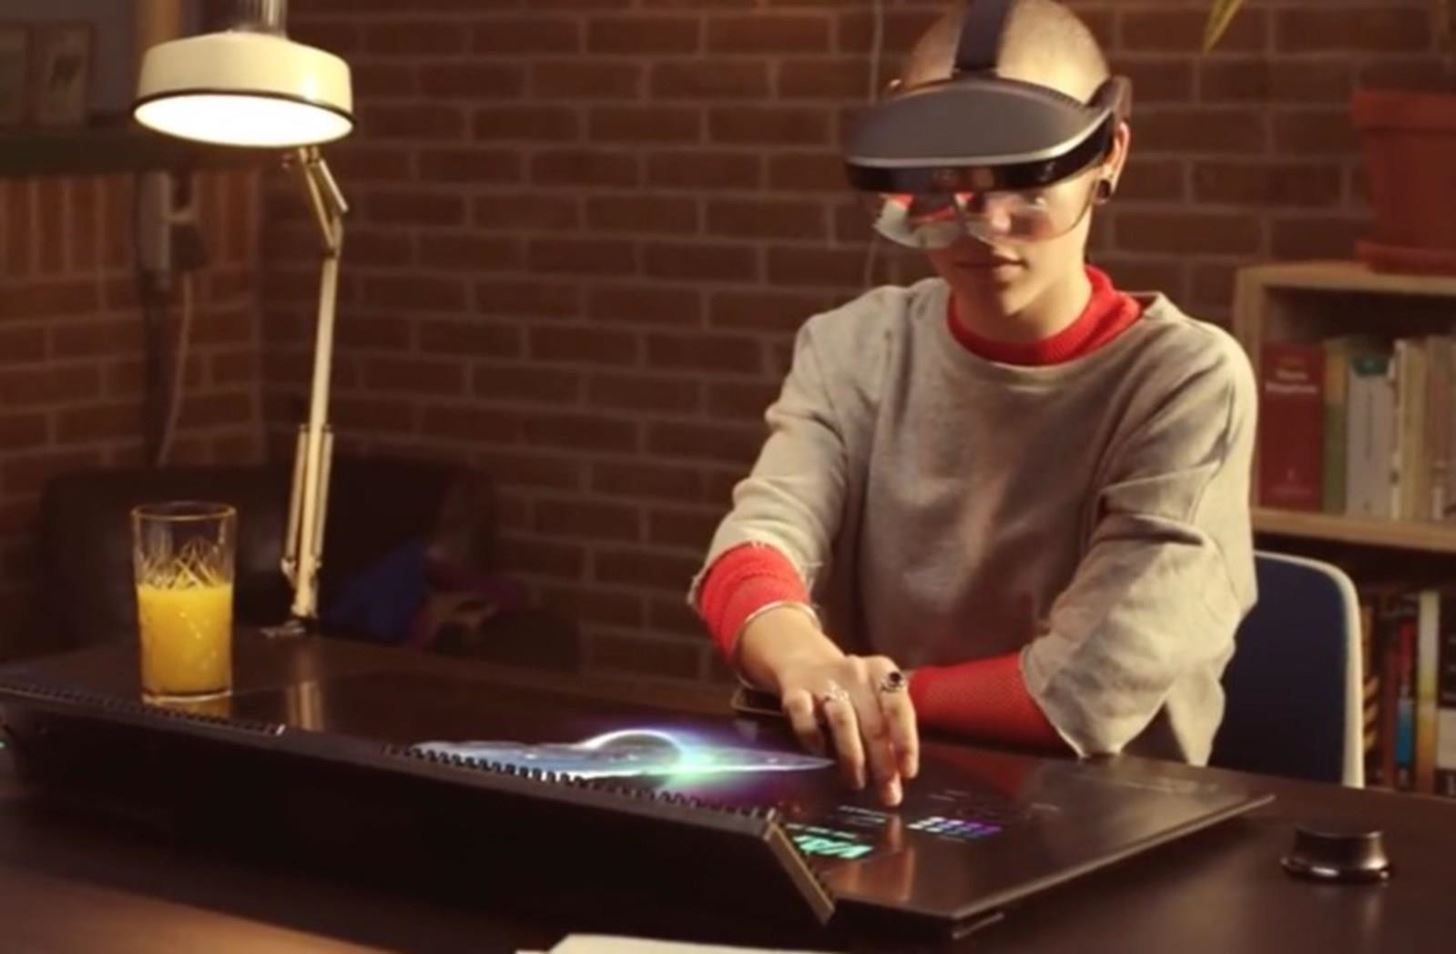 Meta 2 Augmented Reality Headset Available to Businesses Through Dell Starting in February